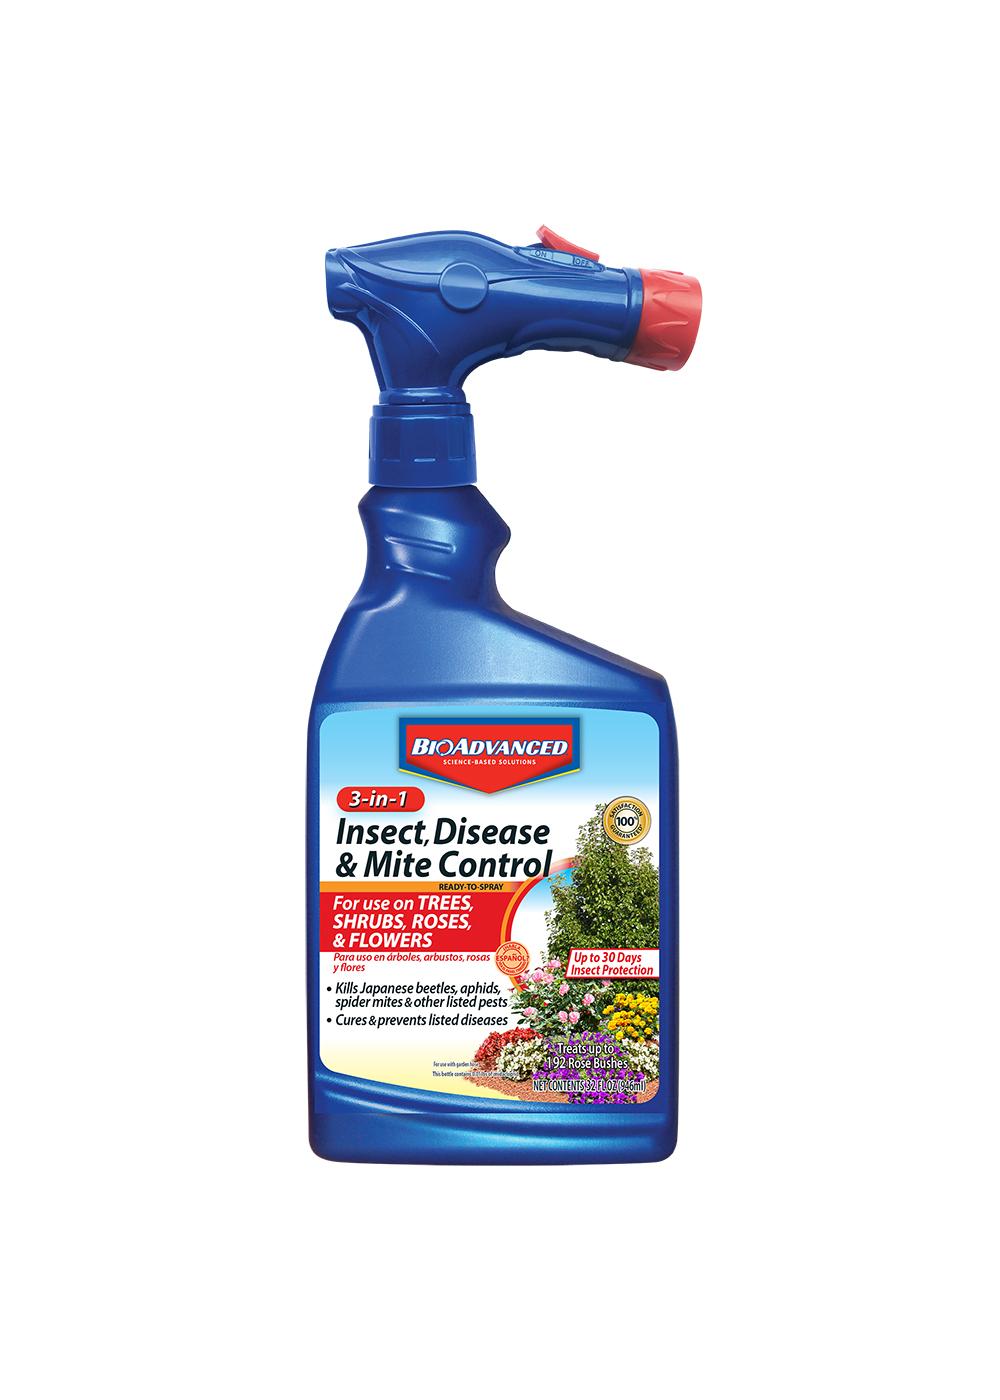 BioAdvanced 3-in-1 Insect, Disease & Mite Control Ready-To-Spray; image 1 of 3